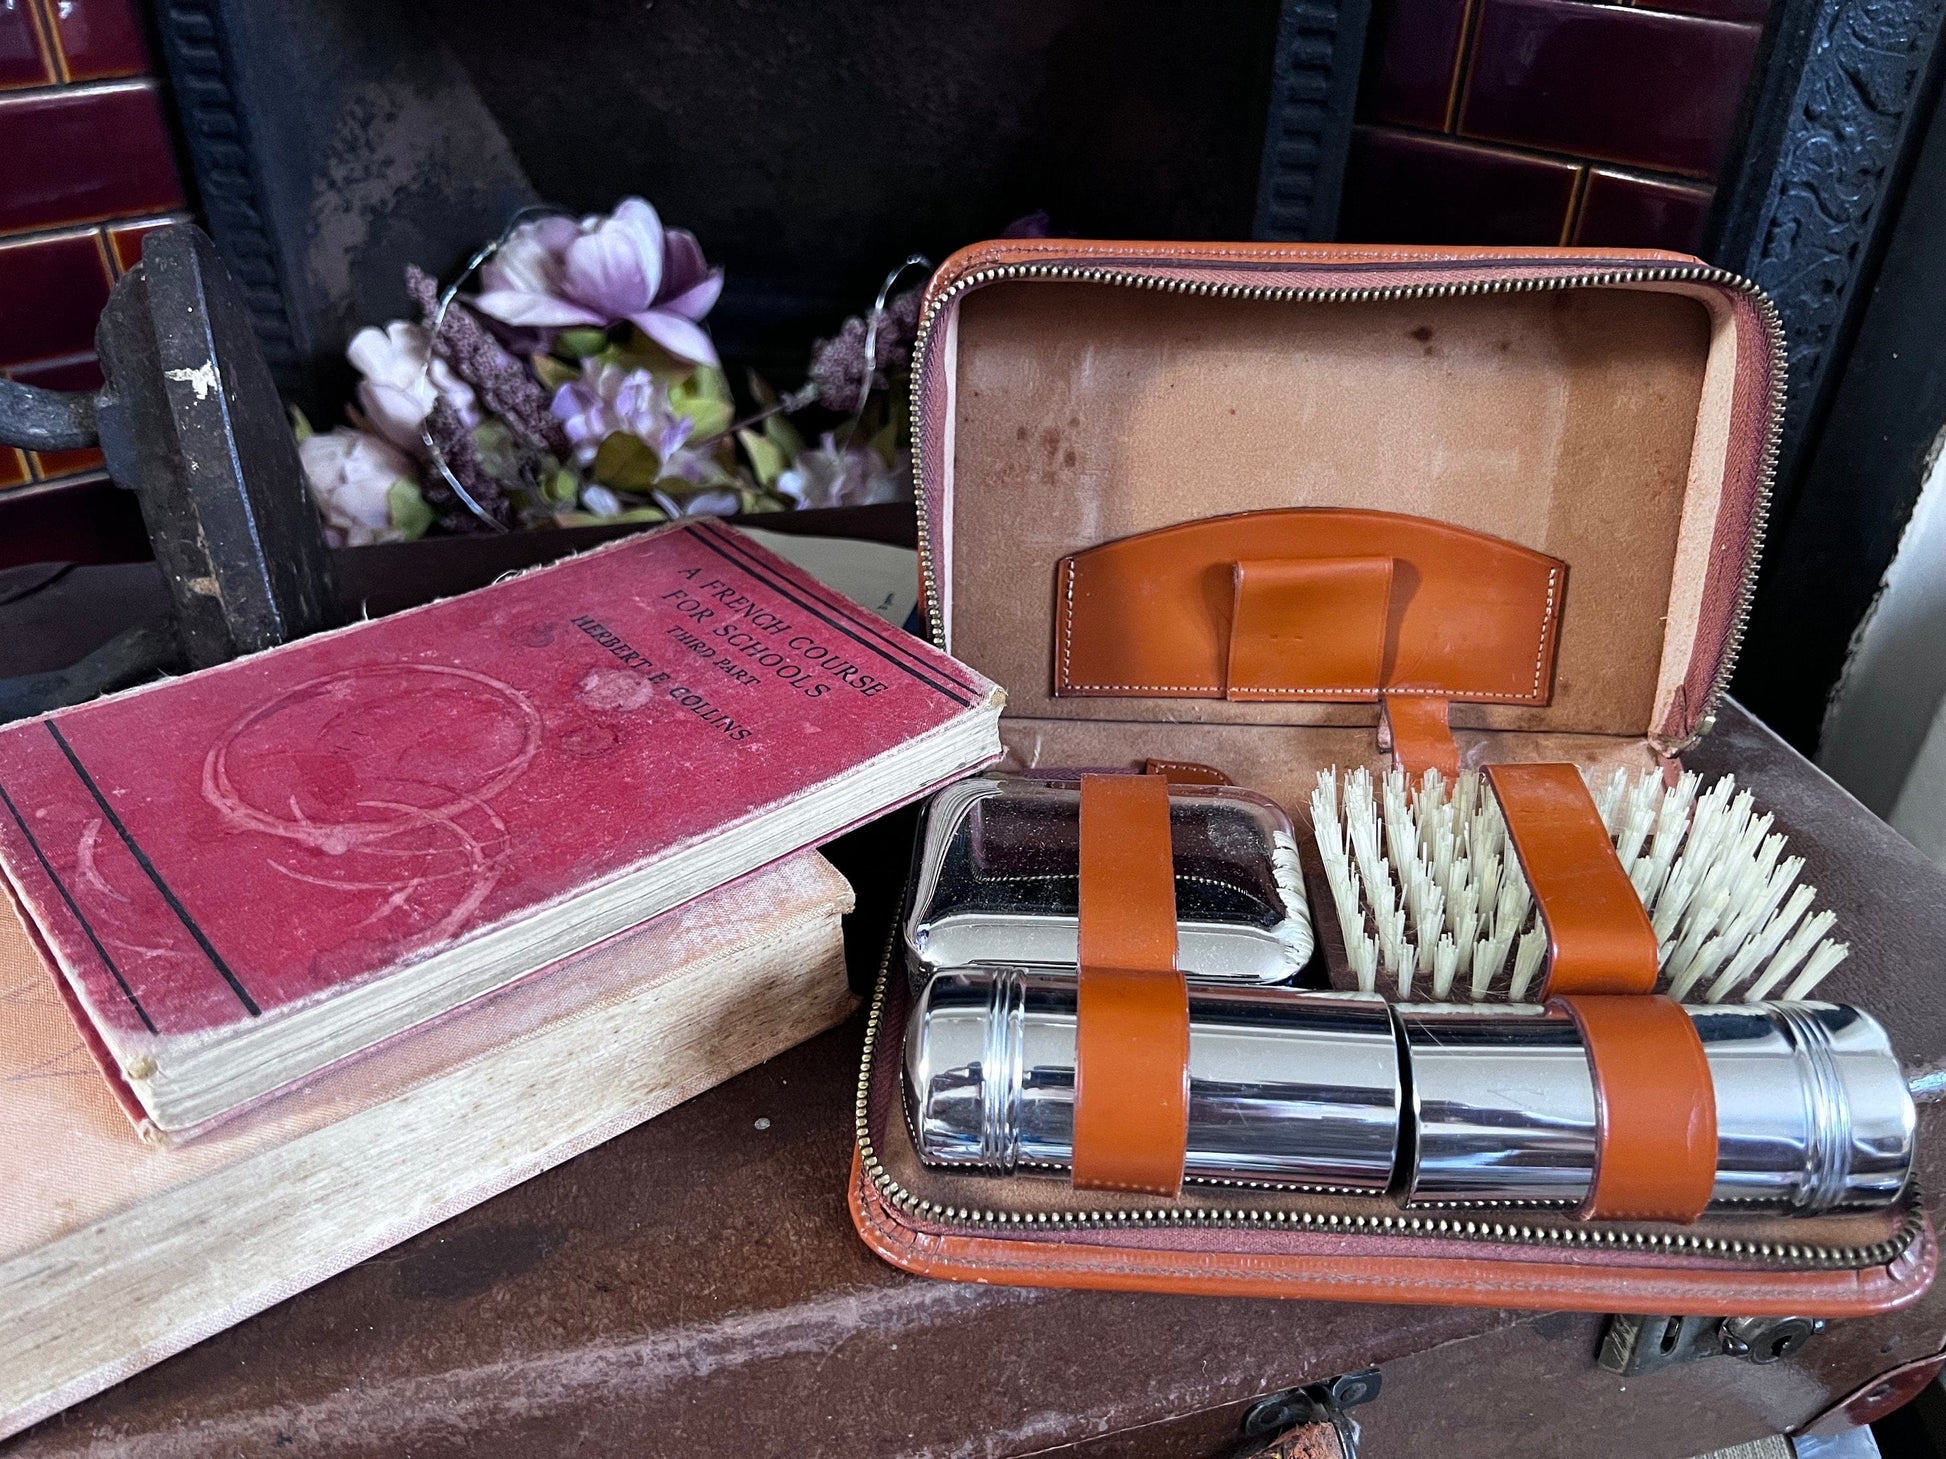 Gents Vintage 1940s Vanity Grooming Set, Leather Case, Vintage Travel, Gents Gift, Vintage Mens Grooming Set, Brush, Bottles, Containers